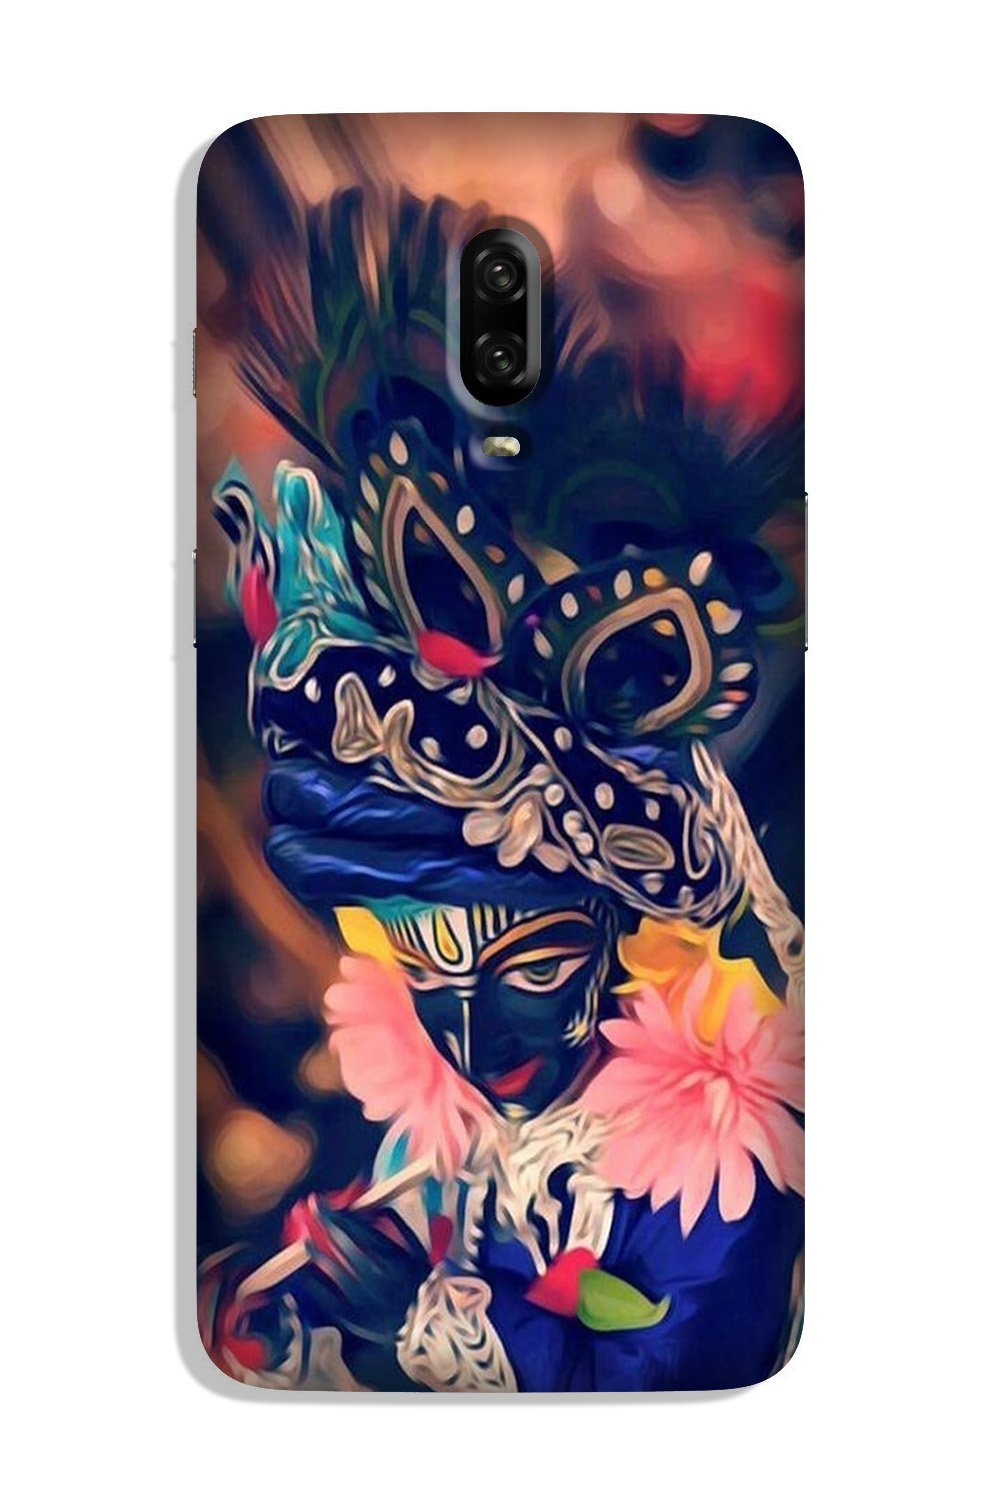 Lord Krishna Case for OnePlus 6T